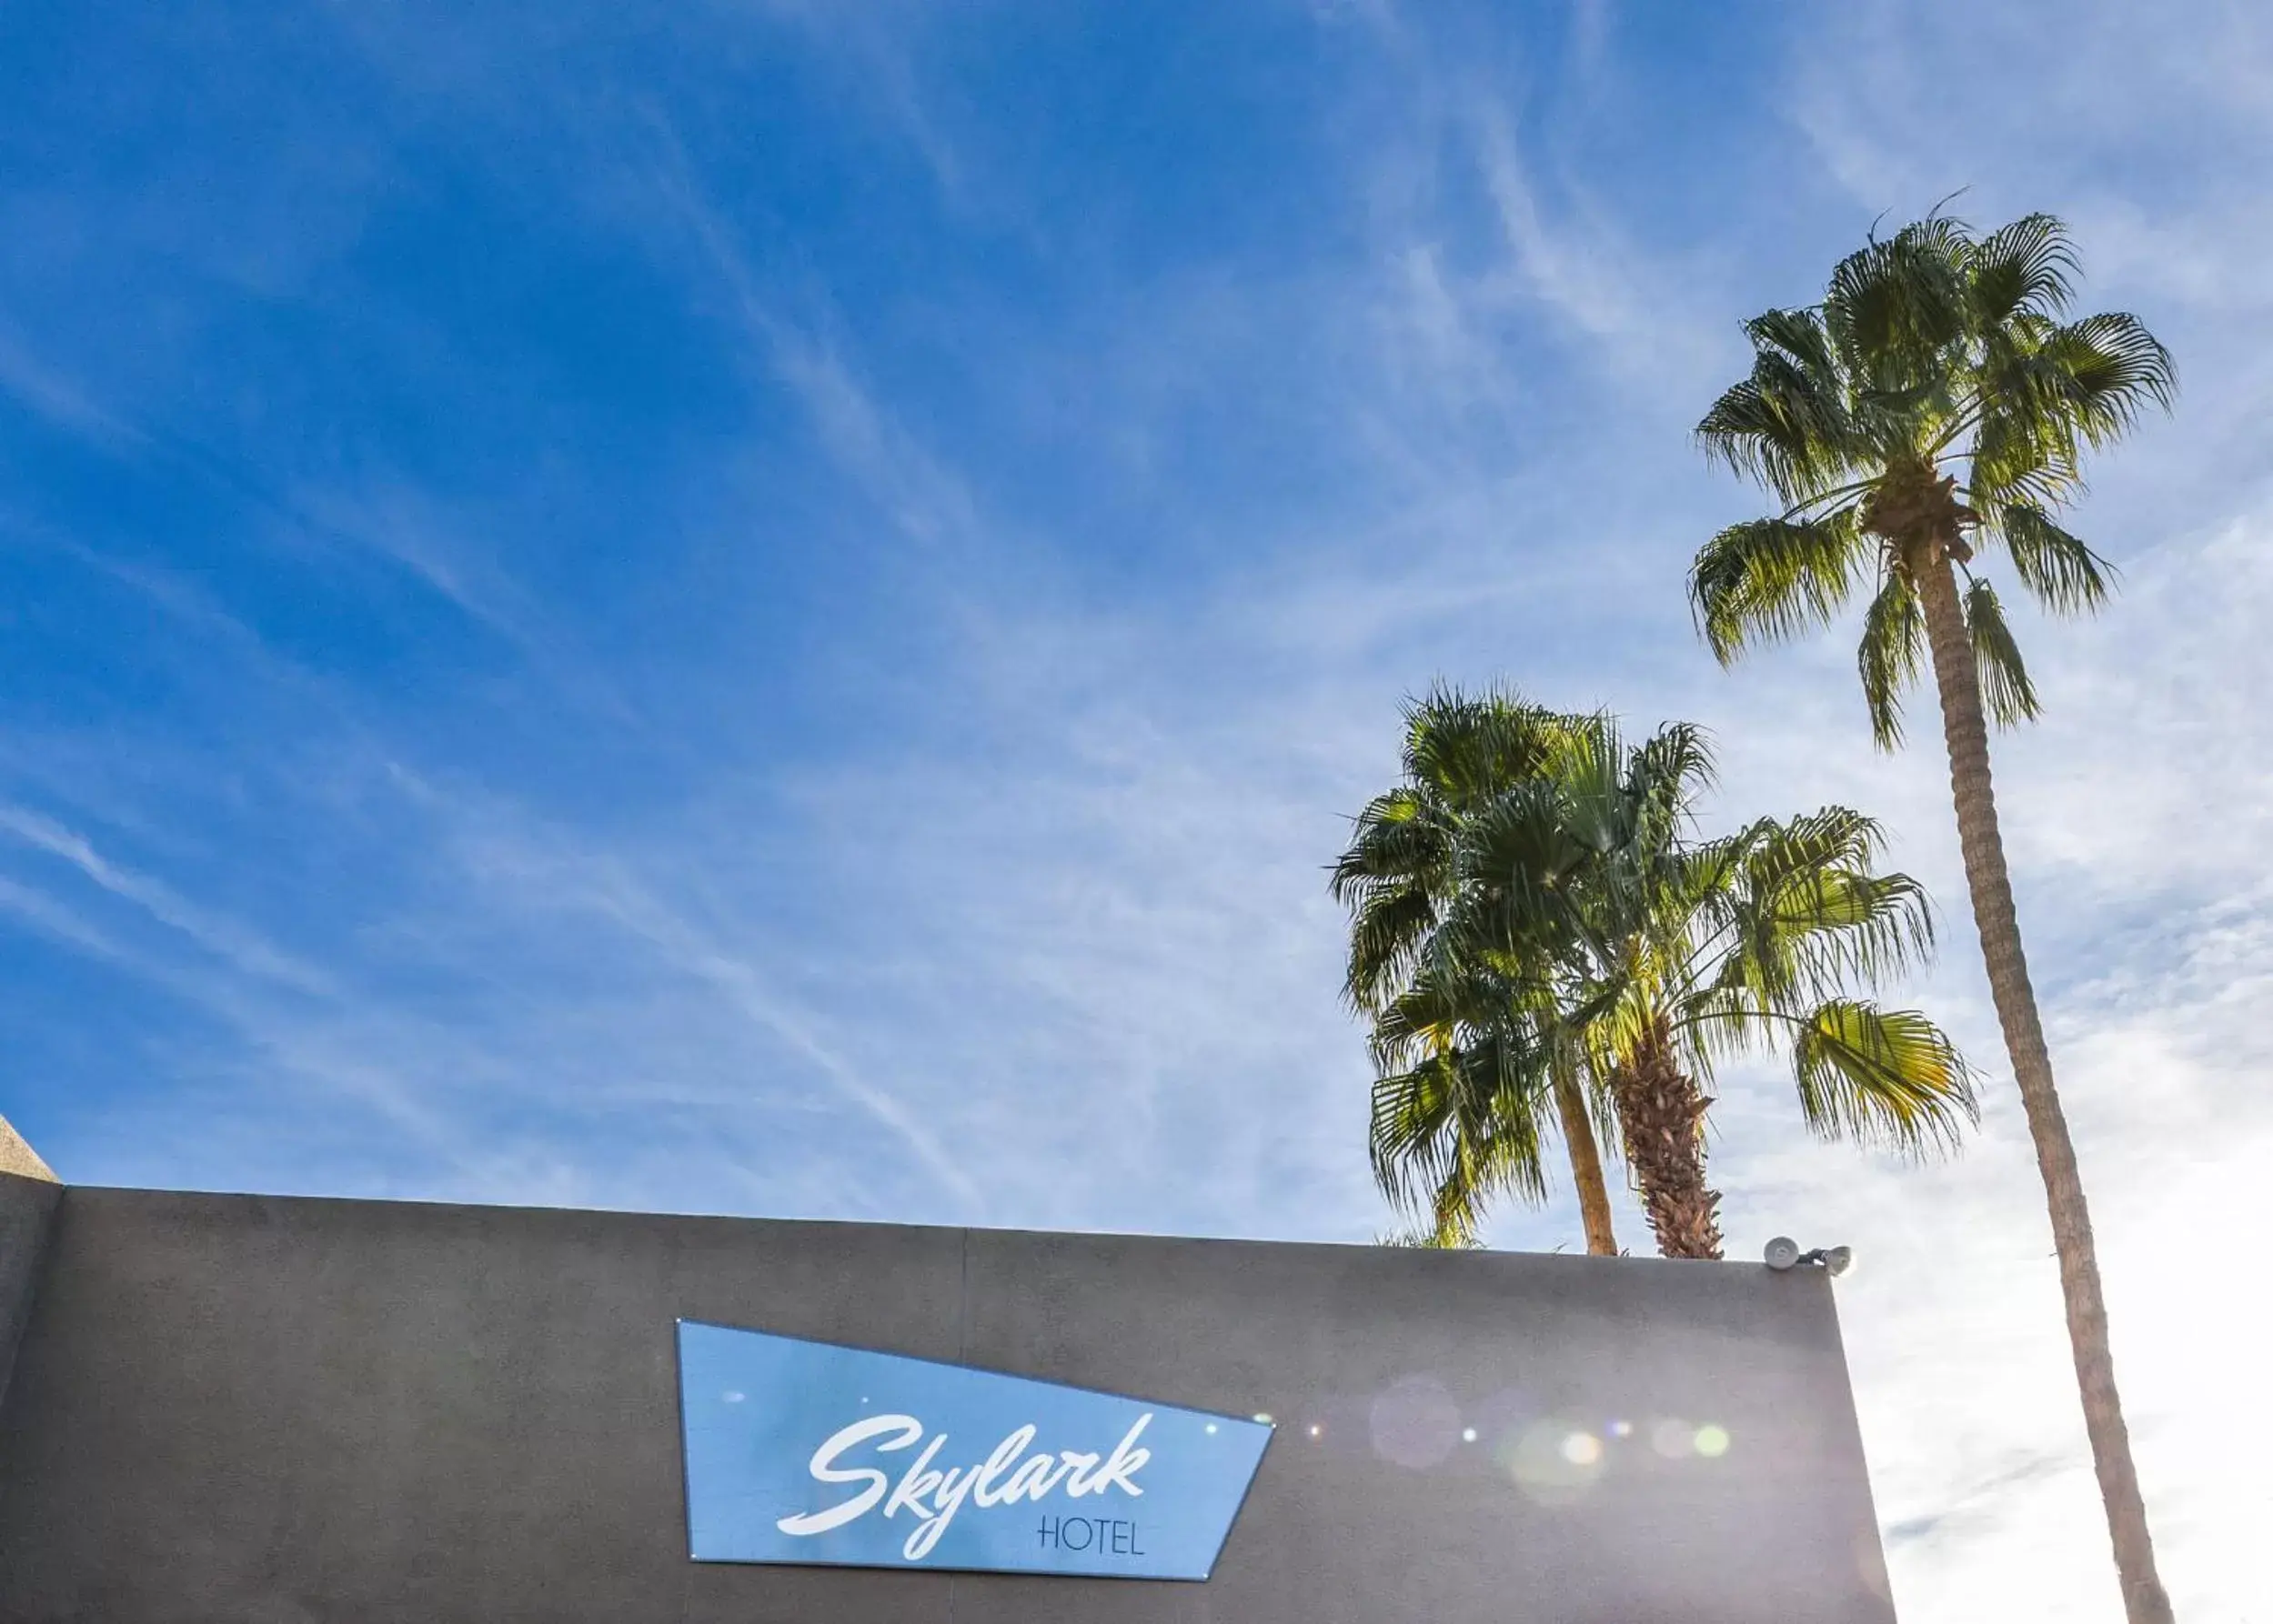 Property logo or sign in The Skylark, a Palm Springs Hotel